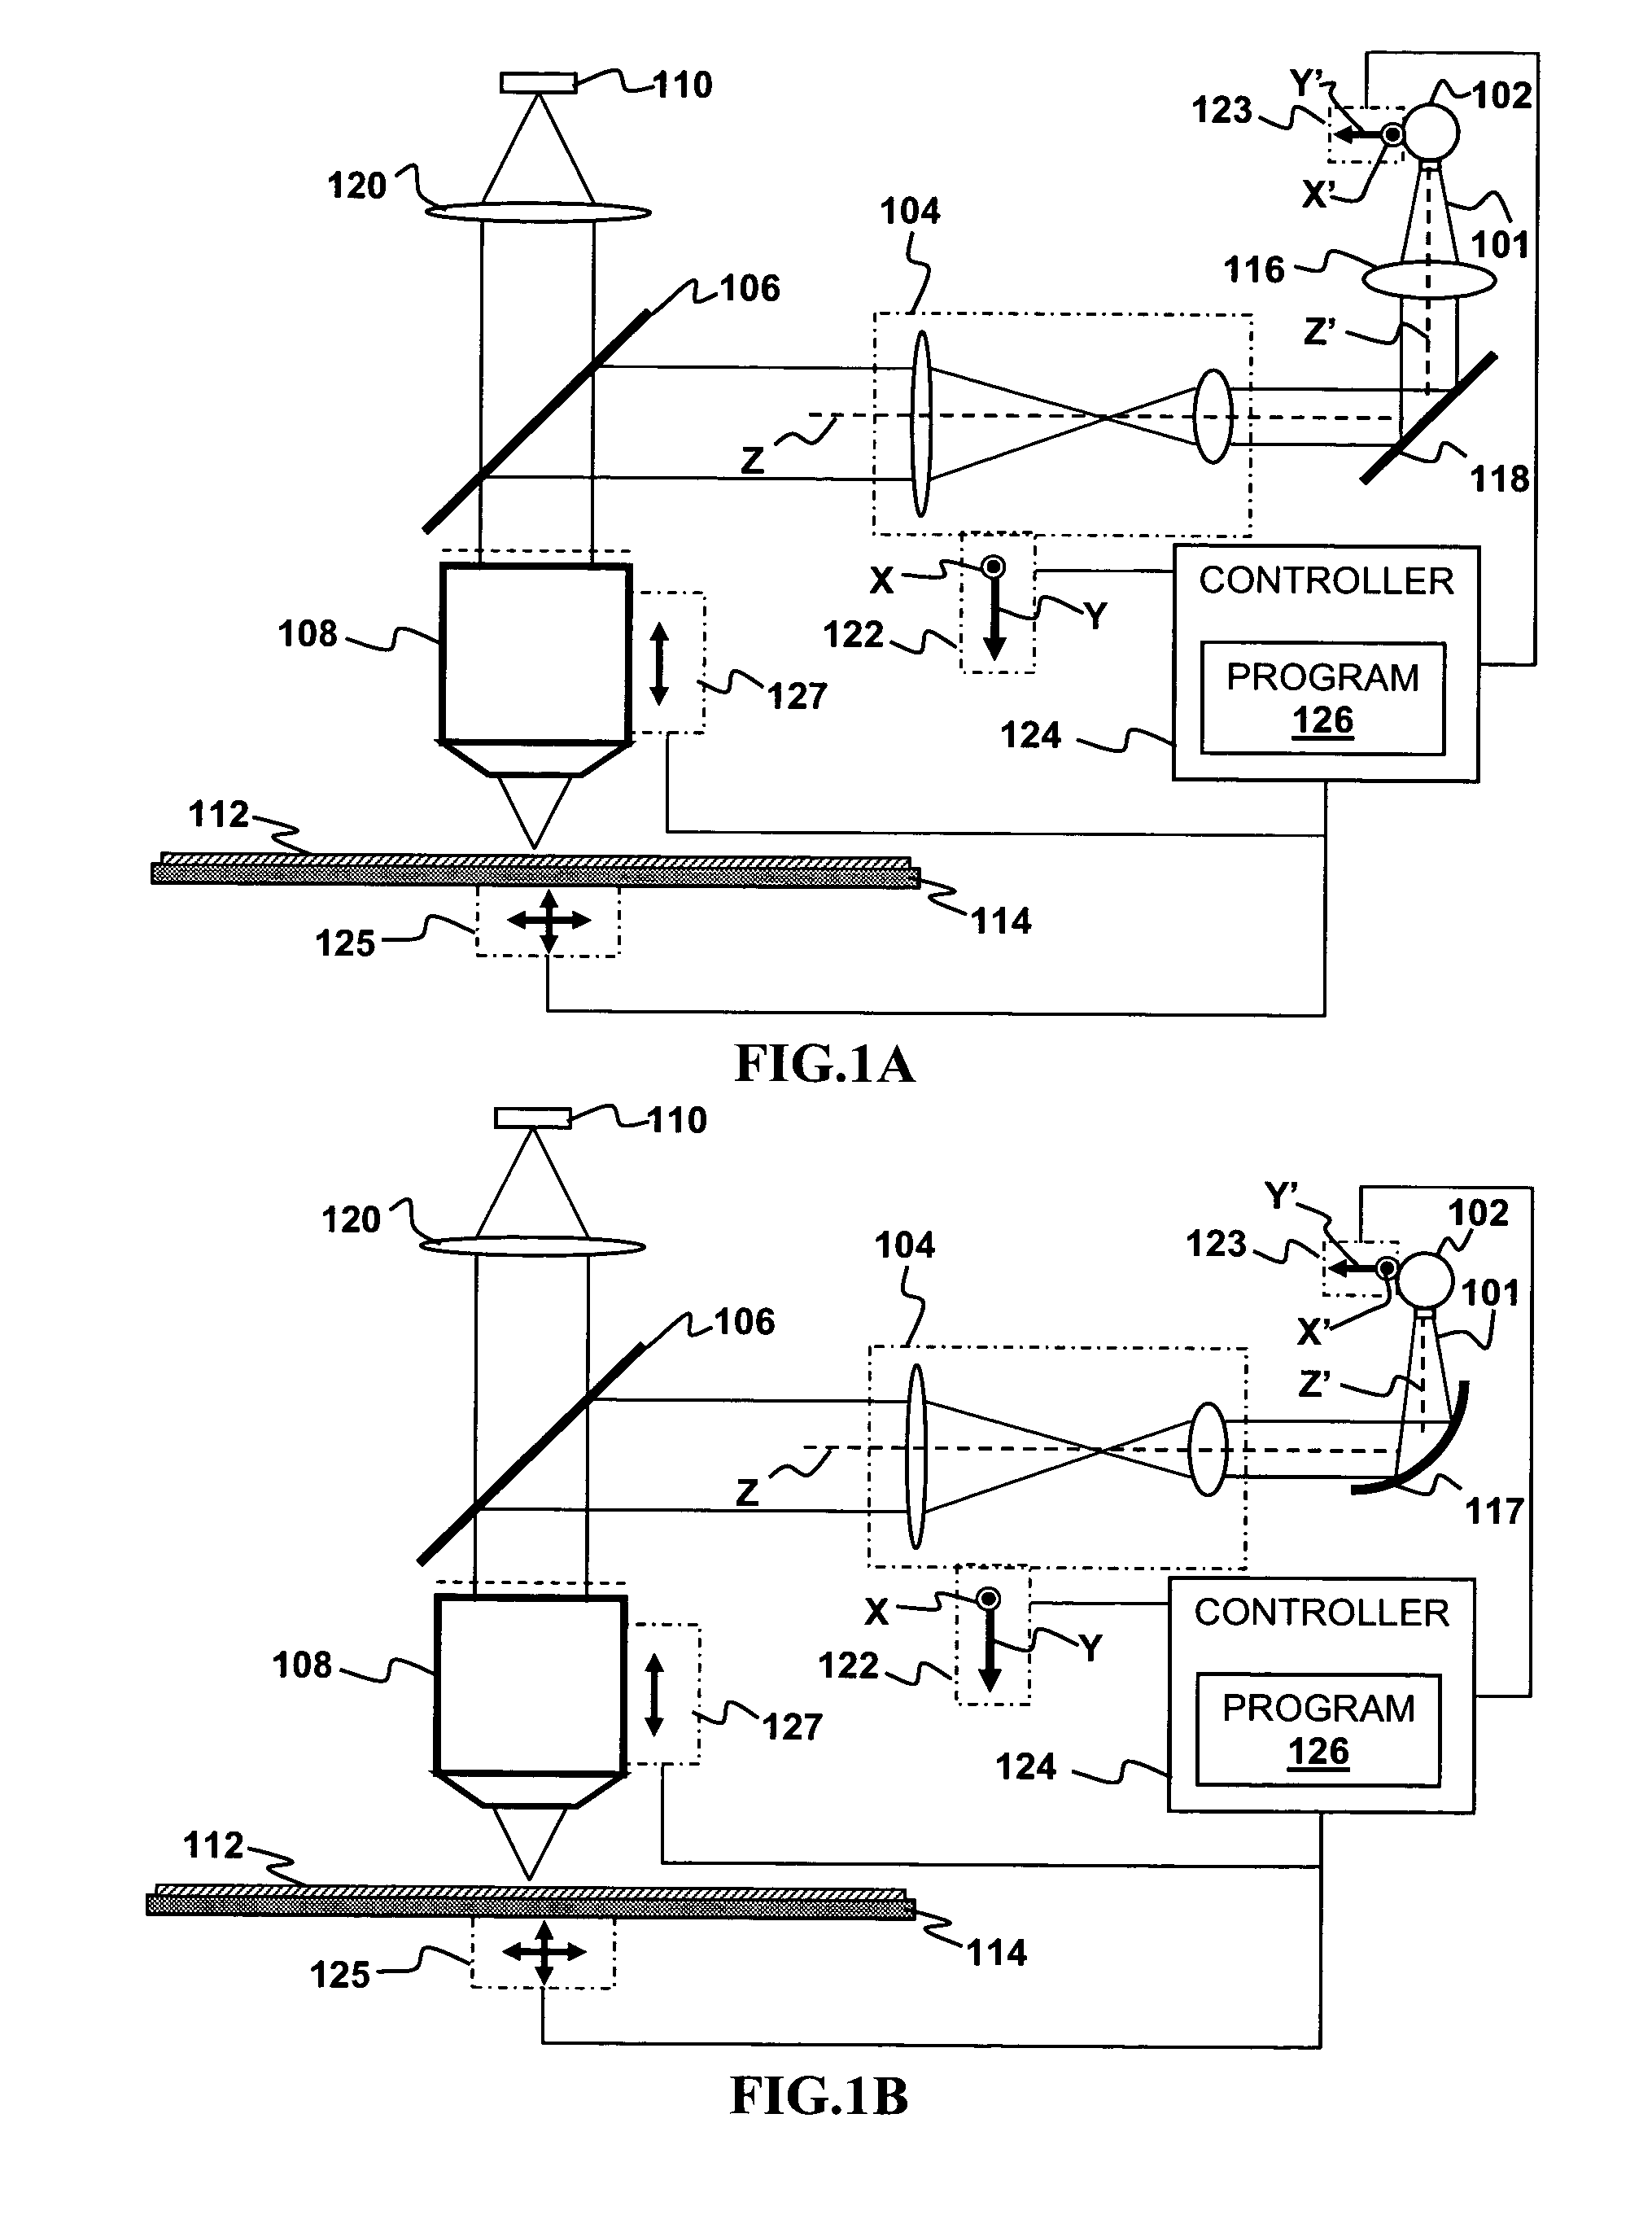 Pattern recognition matching for bright field imaging of low contrast semiconductor devices